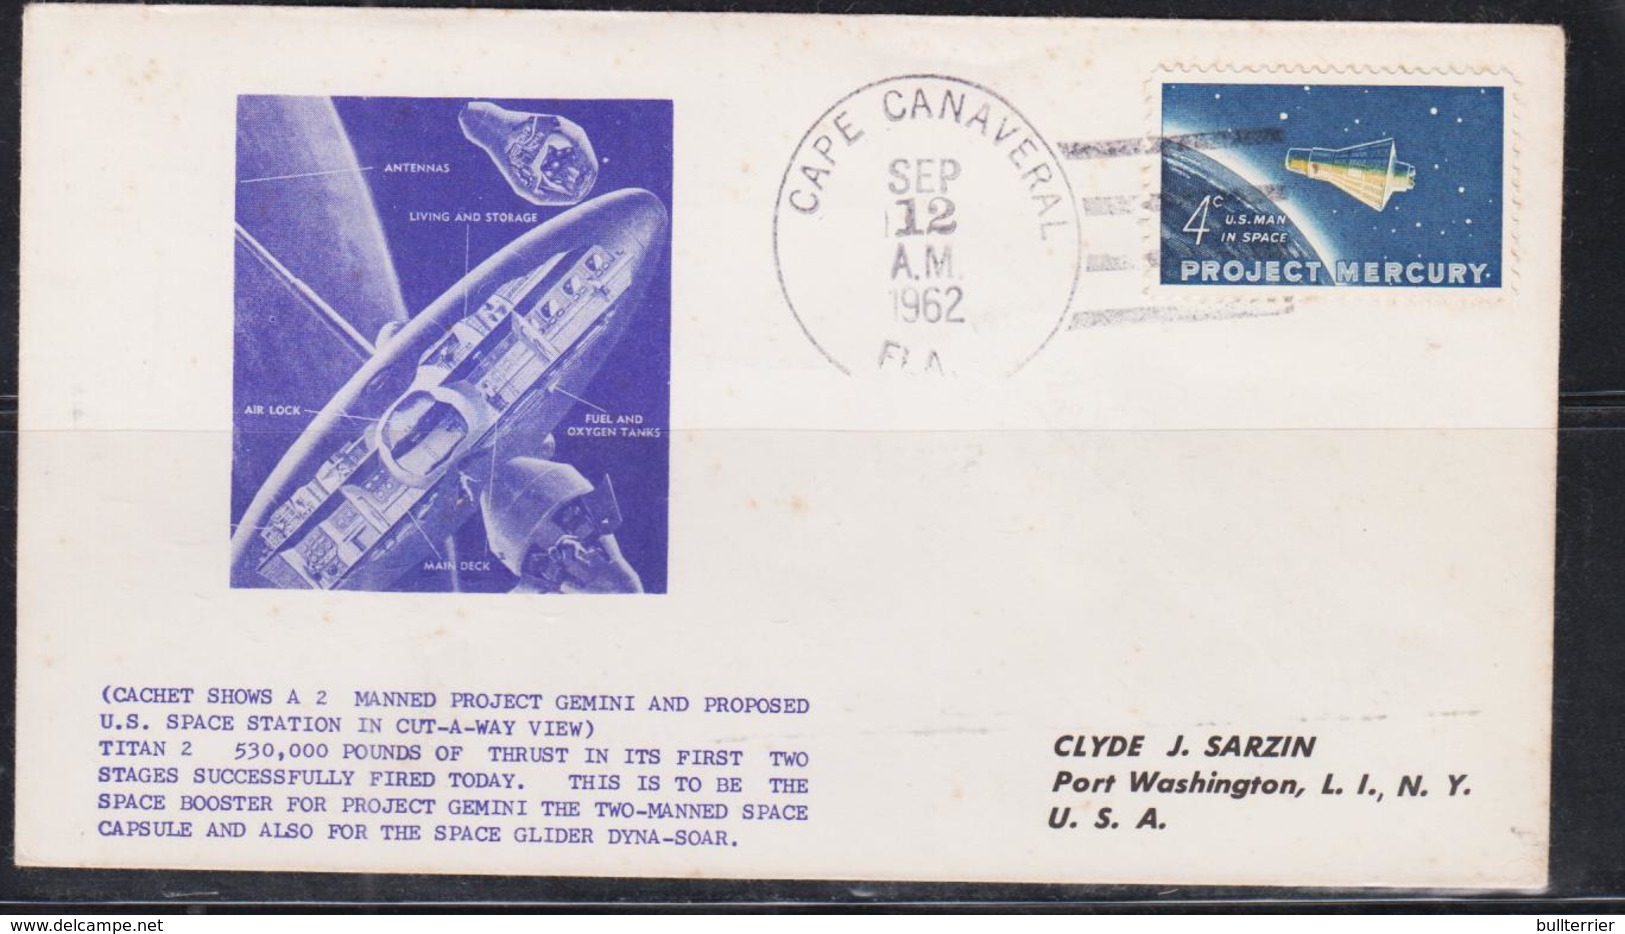 SPACE  - USA-  1962 - A2 GEMINI  ILLUSTRATED   COVER WITH  LARGE CAPE CANAVERAL  SEP 12 1962  POSTMARK - United States